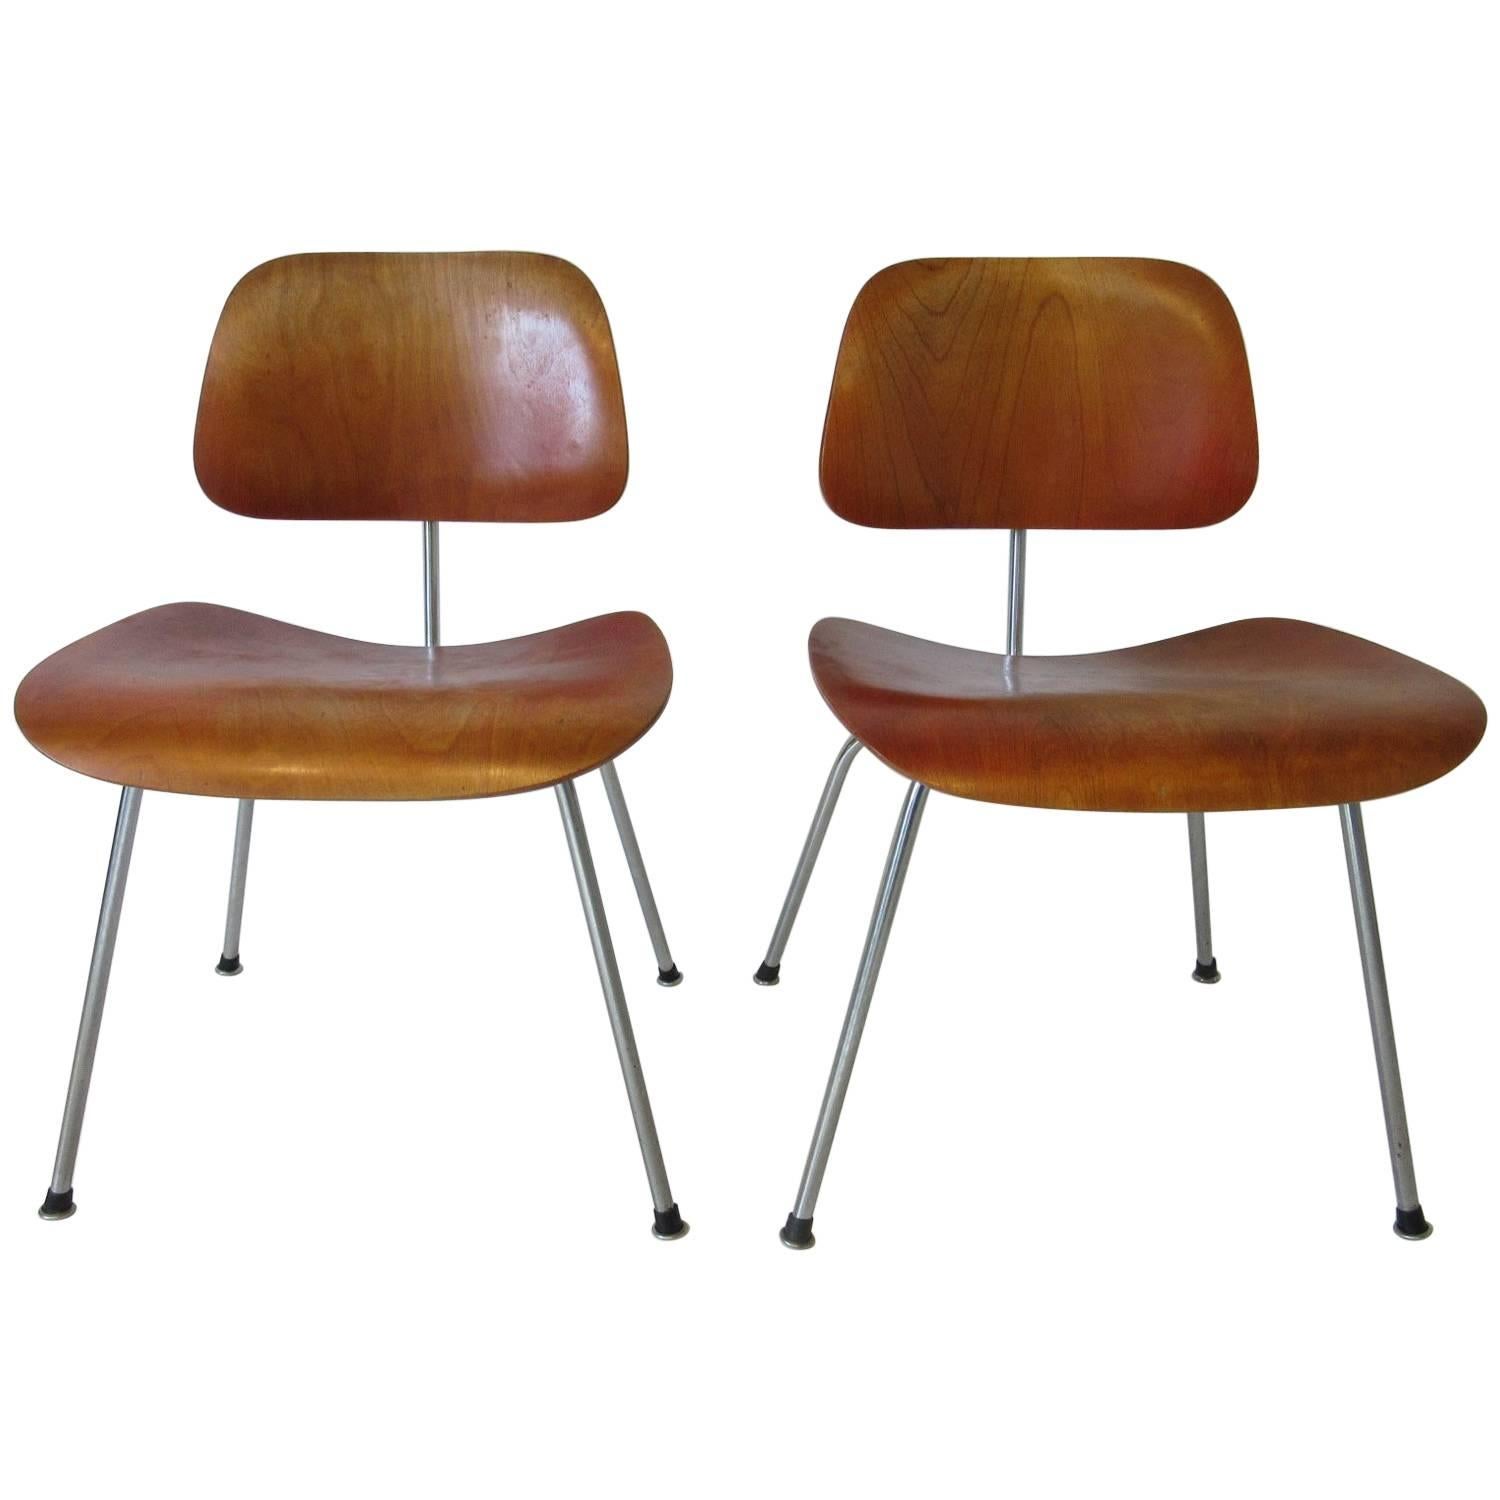 Eames Red Aniline Dyed DCM Chairs by Herman Miller